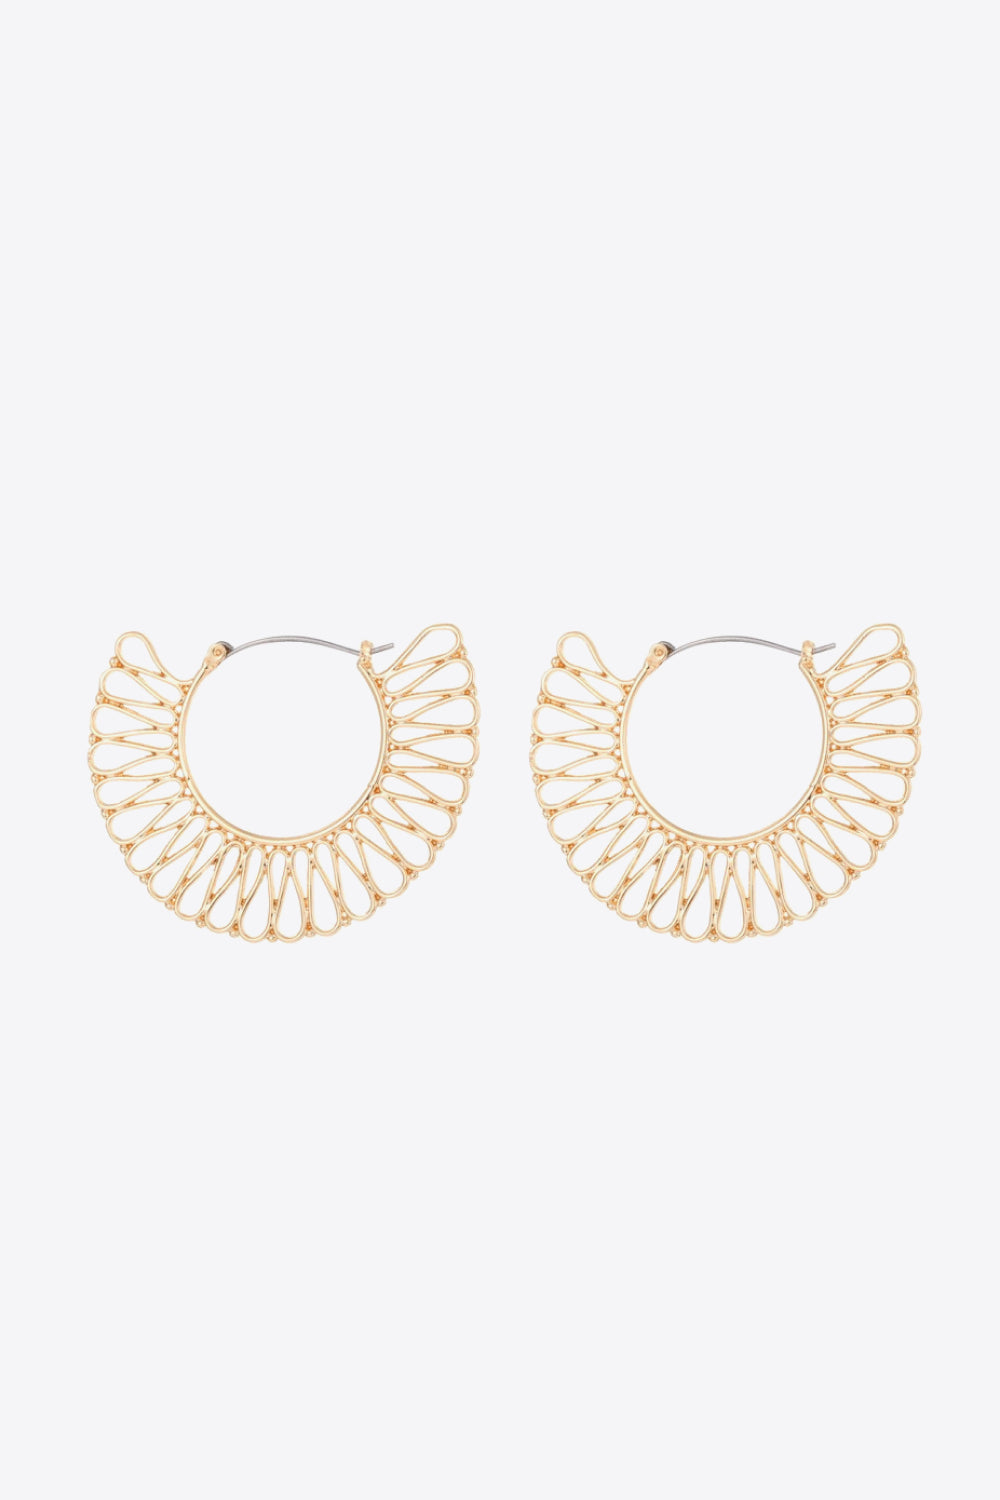 5-Pair Wholesale 18K Gold-Plated Cutout Earrings